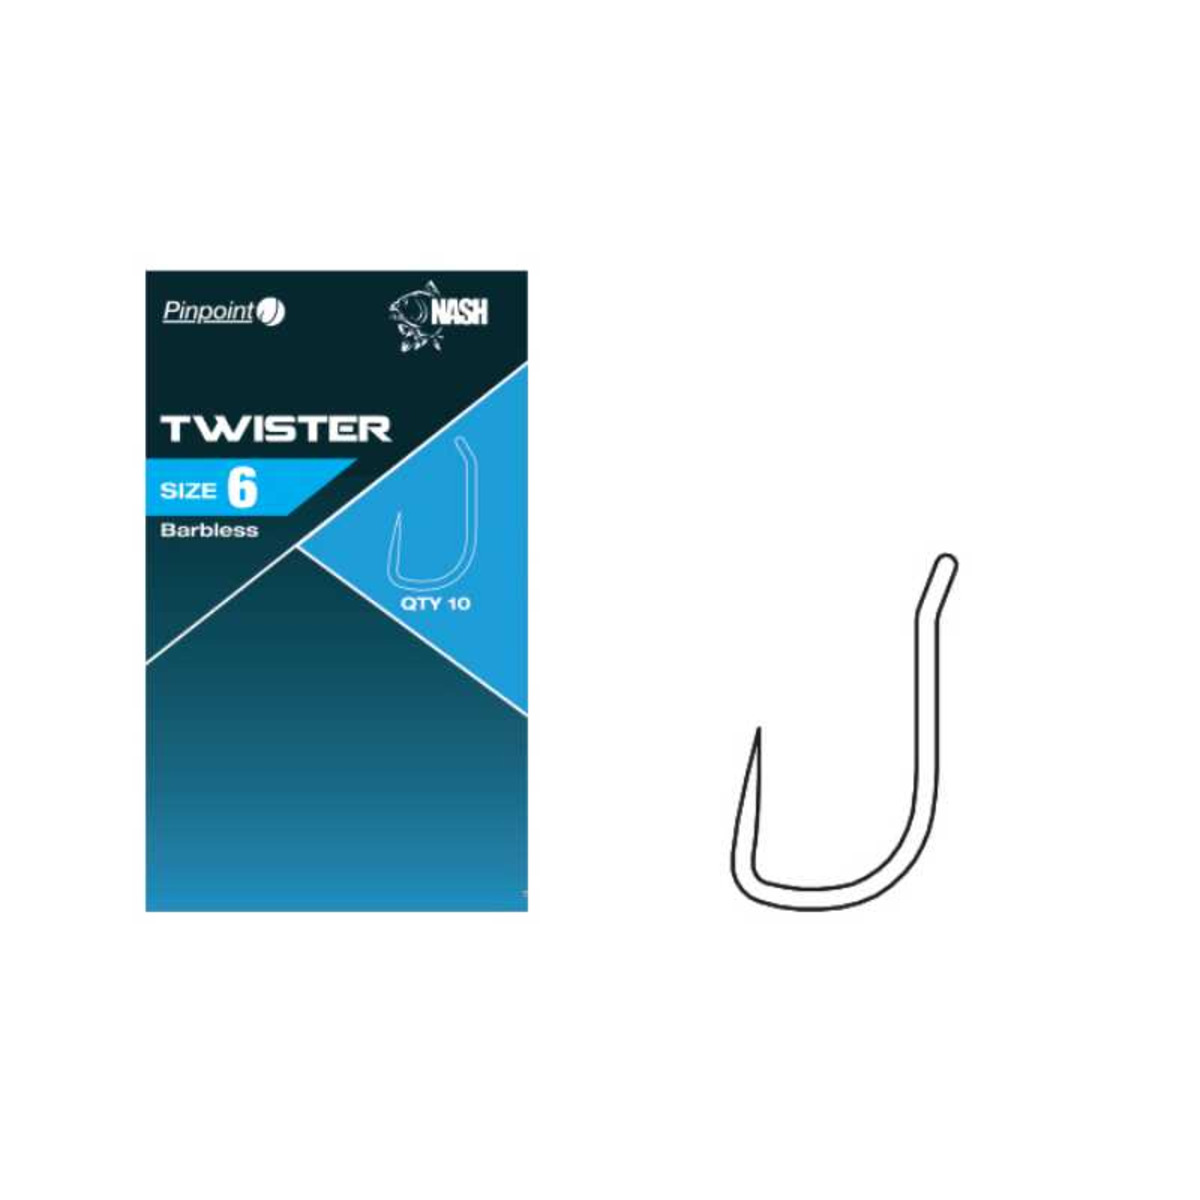 Nash Chod Twister - Size 6 Barbless